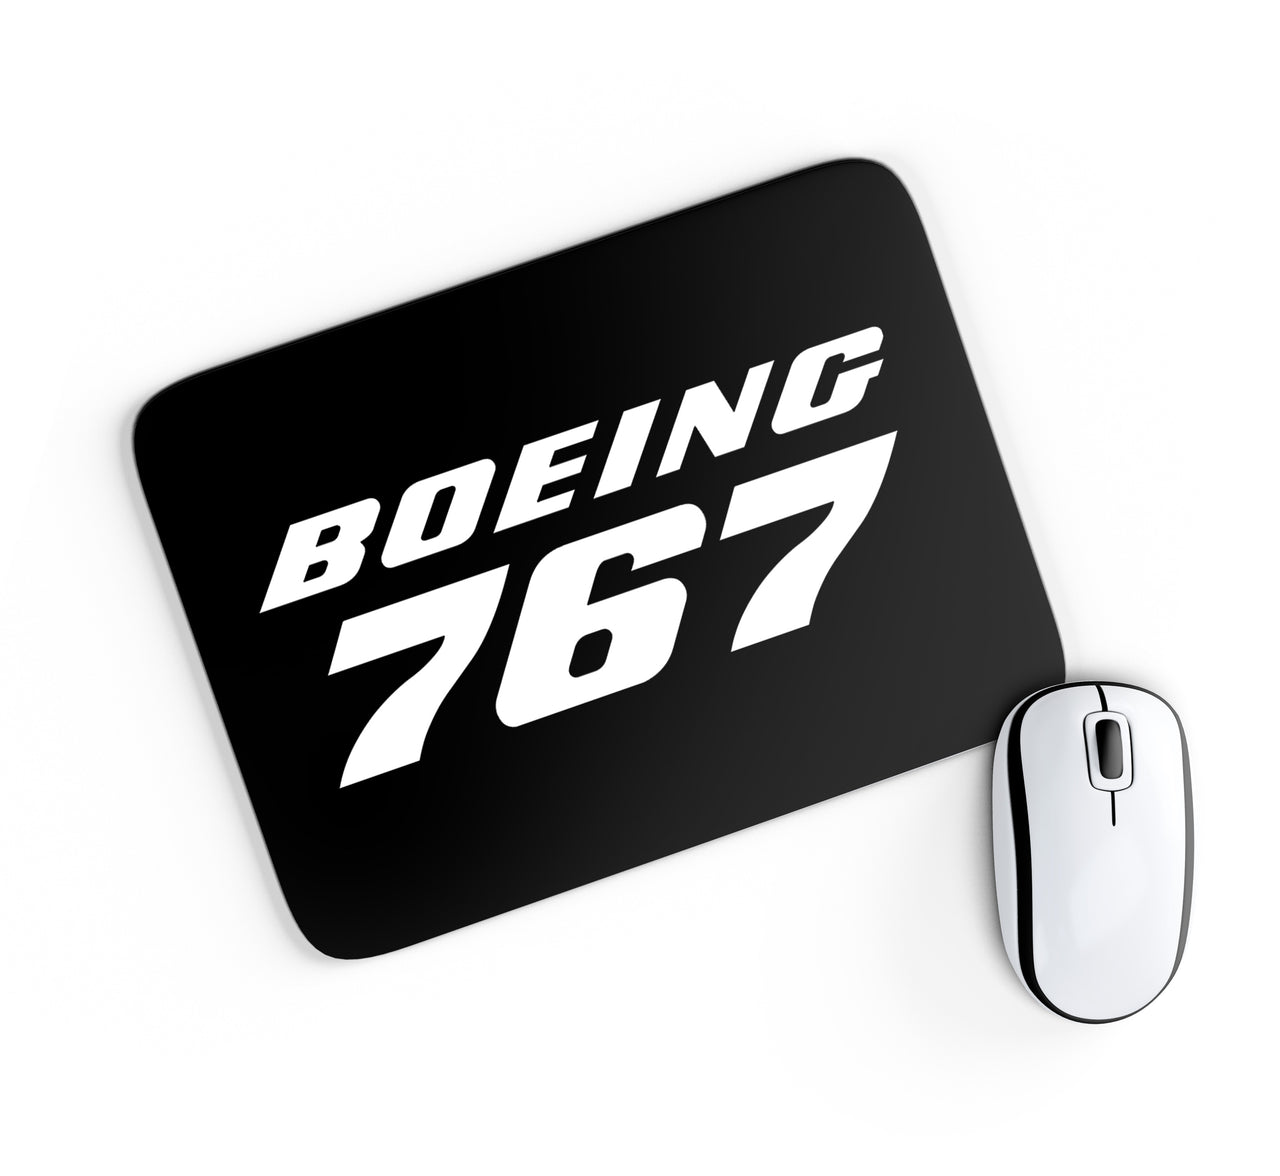 Boeing 767 & Text Designed Mouse Pads